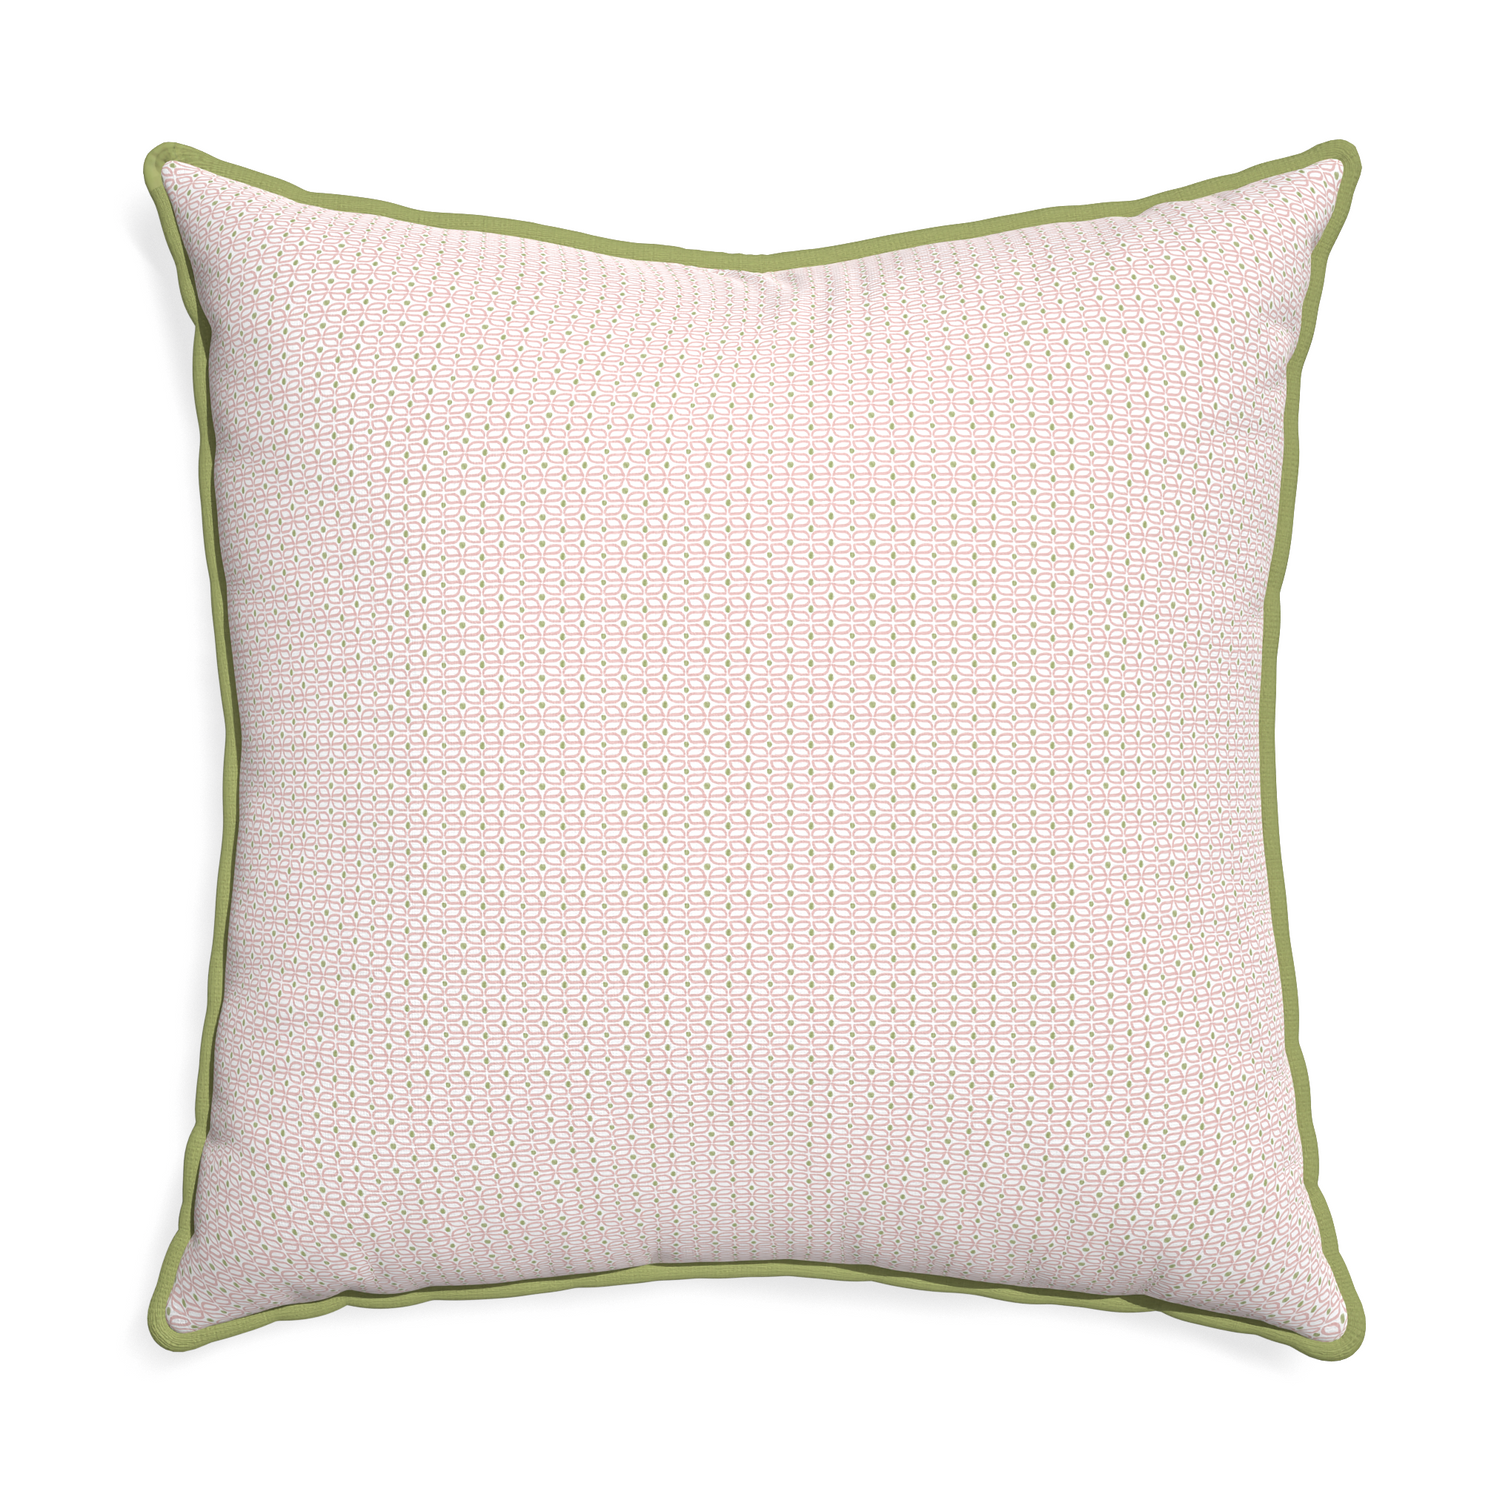 Euro-sham loomi pink custom pillow with moss piping on white background